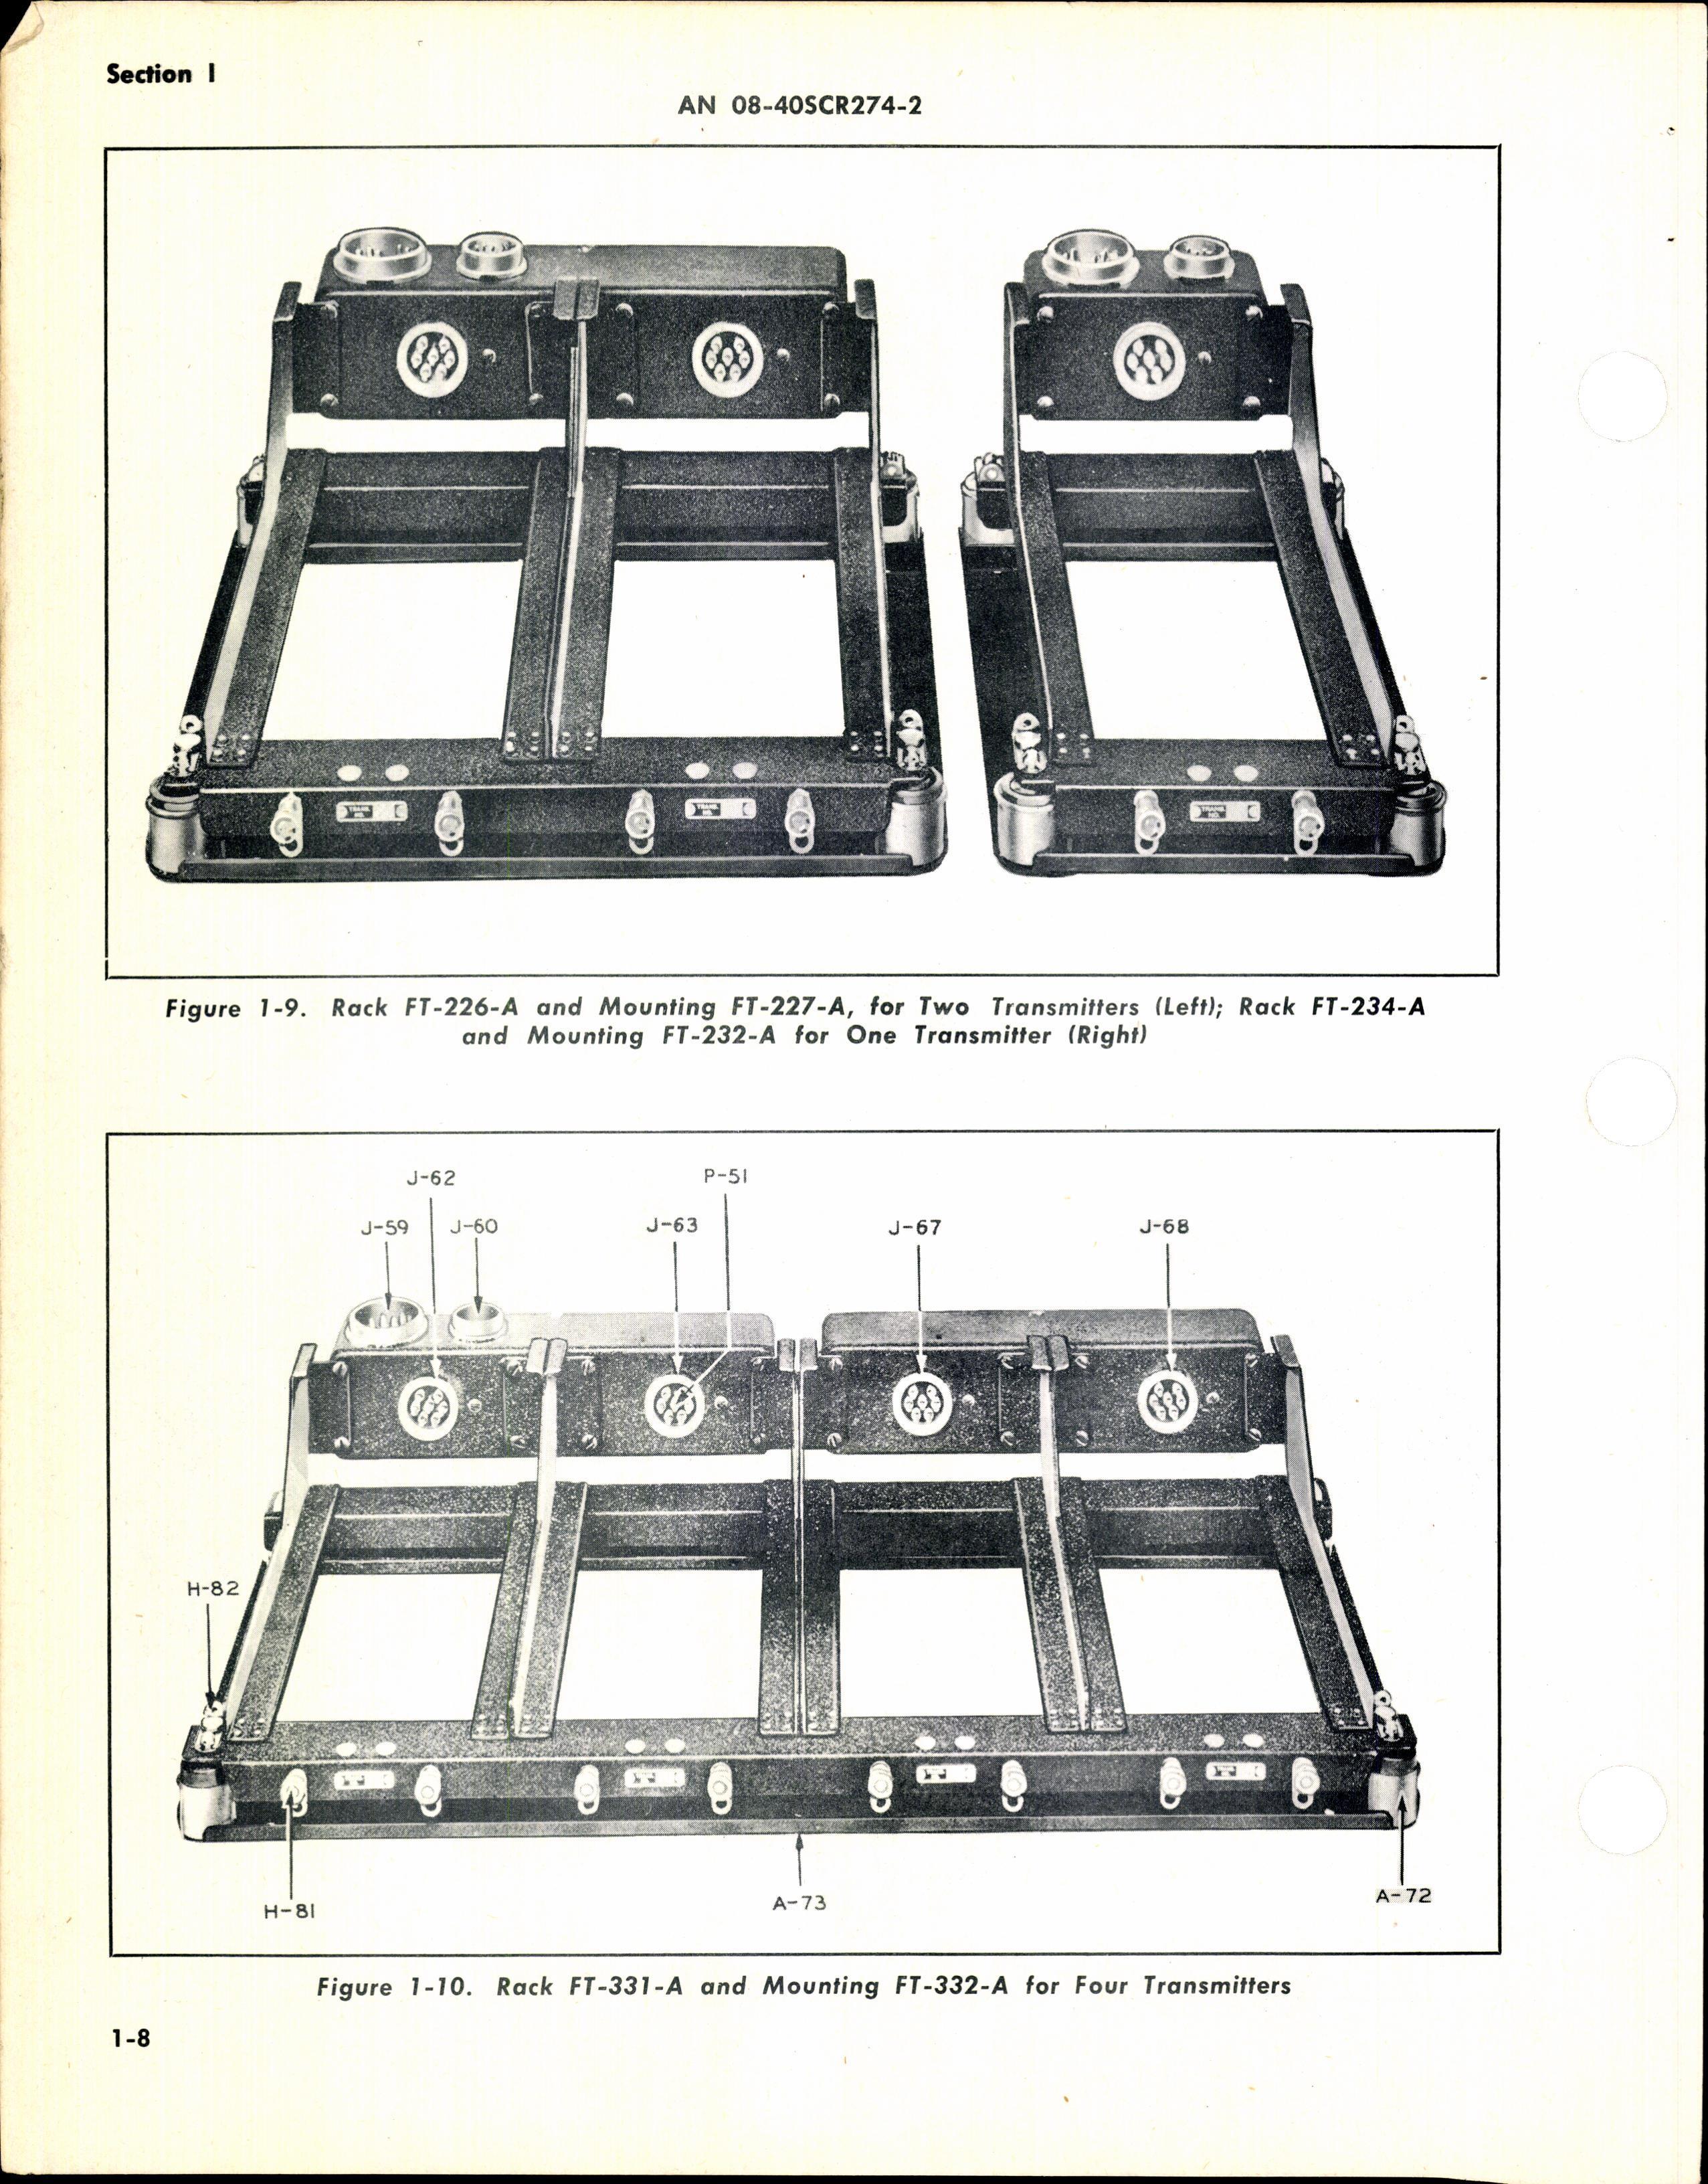 Sample page 14 from AirCorps Library document: Handbook Operating Instructions for Radio Set SCR-274-N